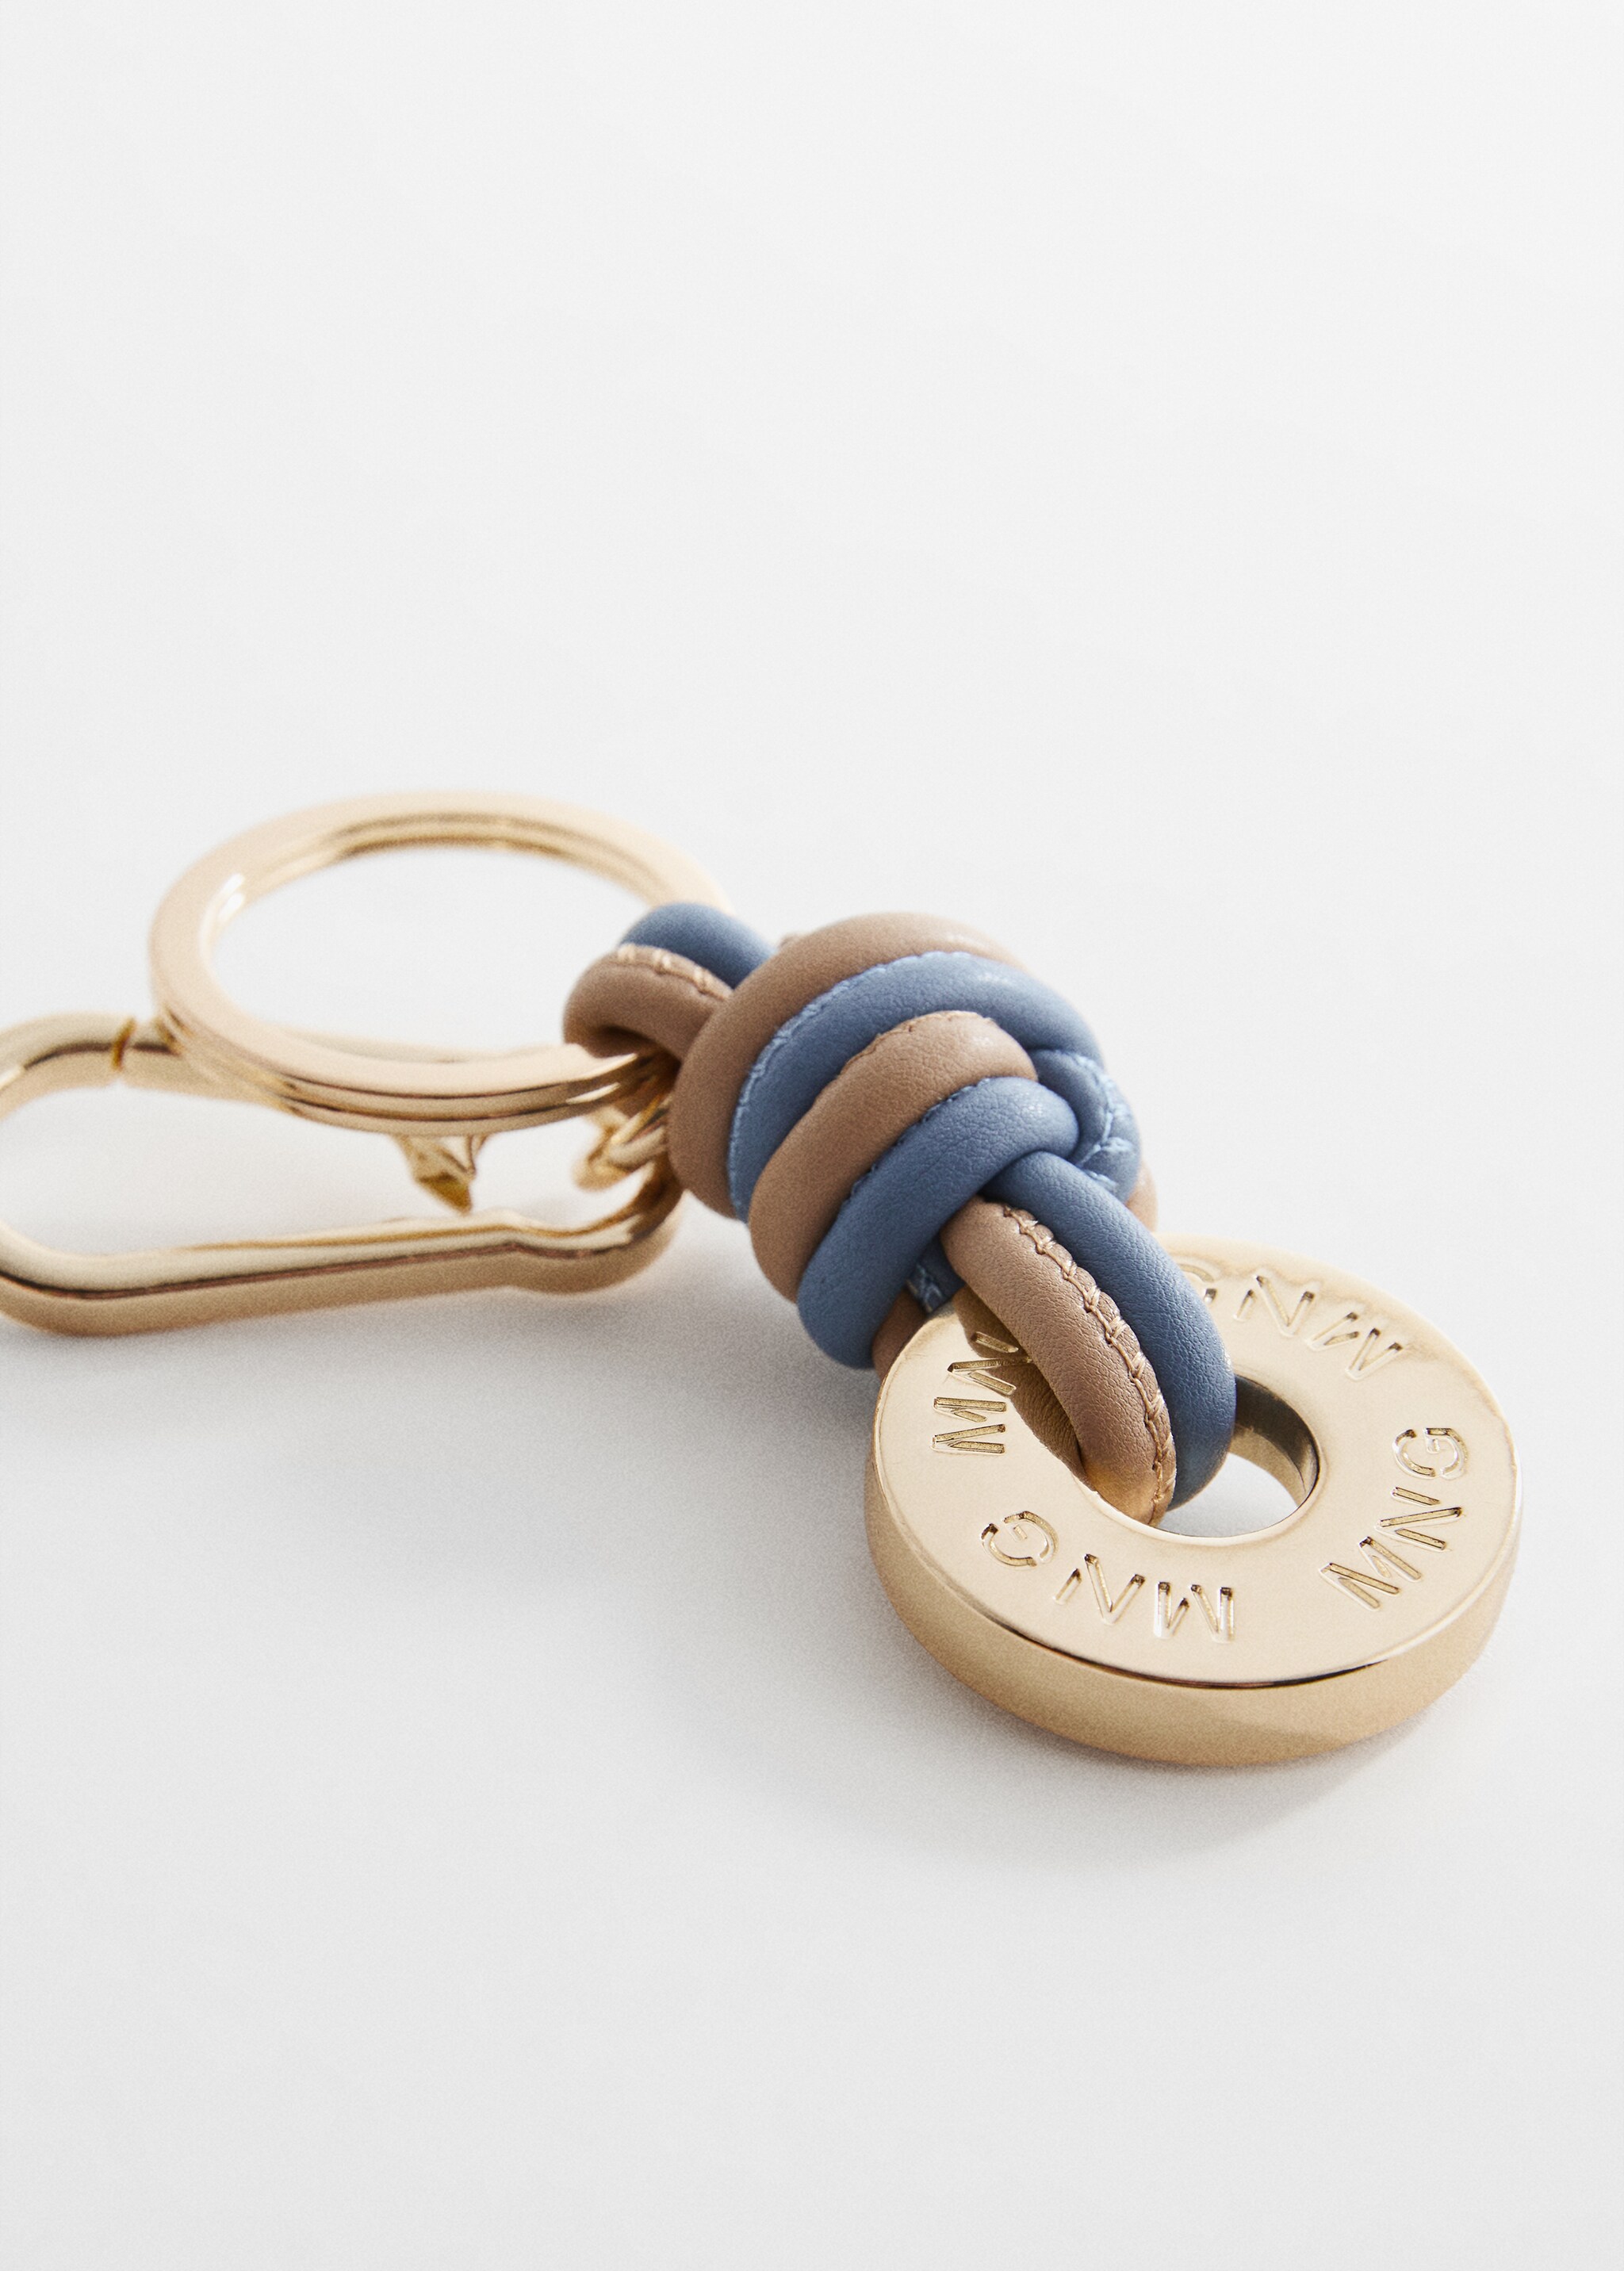 Leather-effect keychain with knot - Medium plane